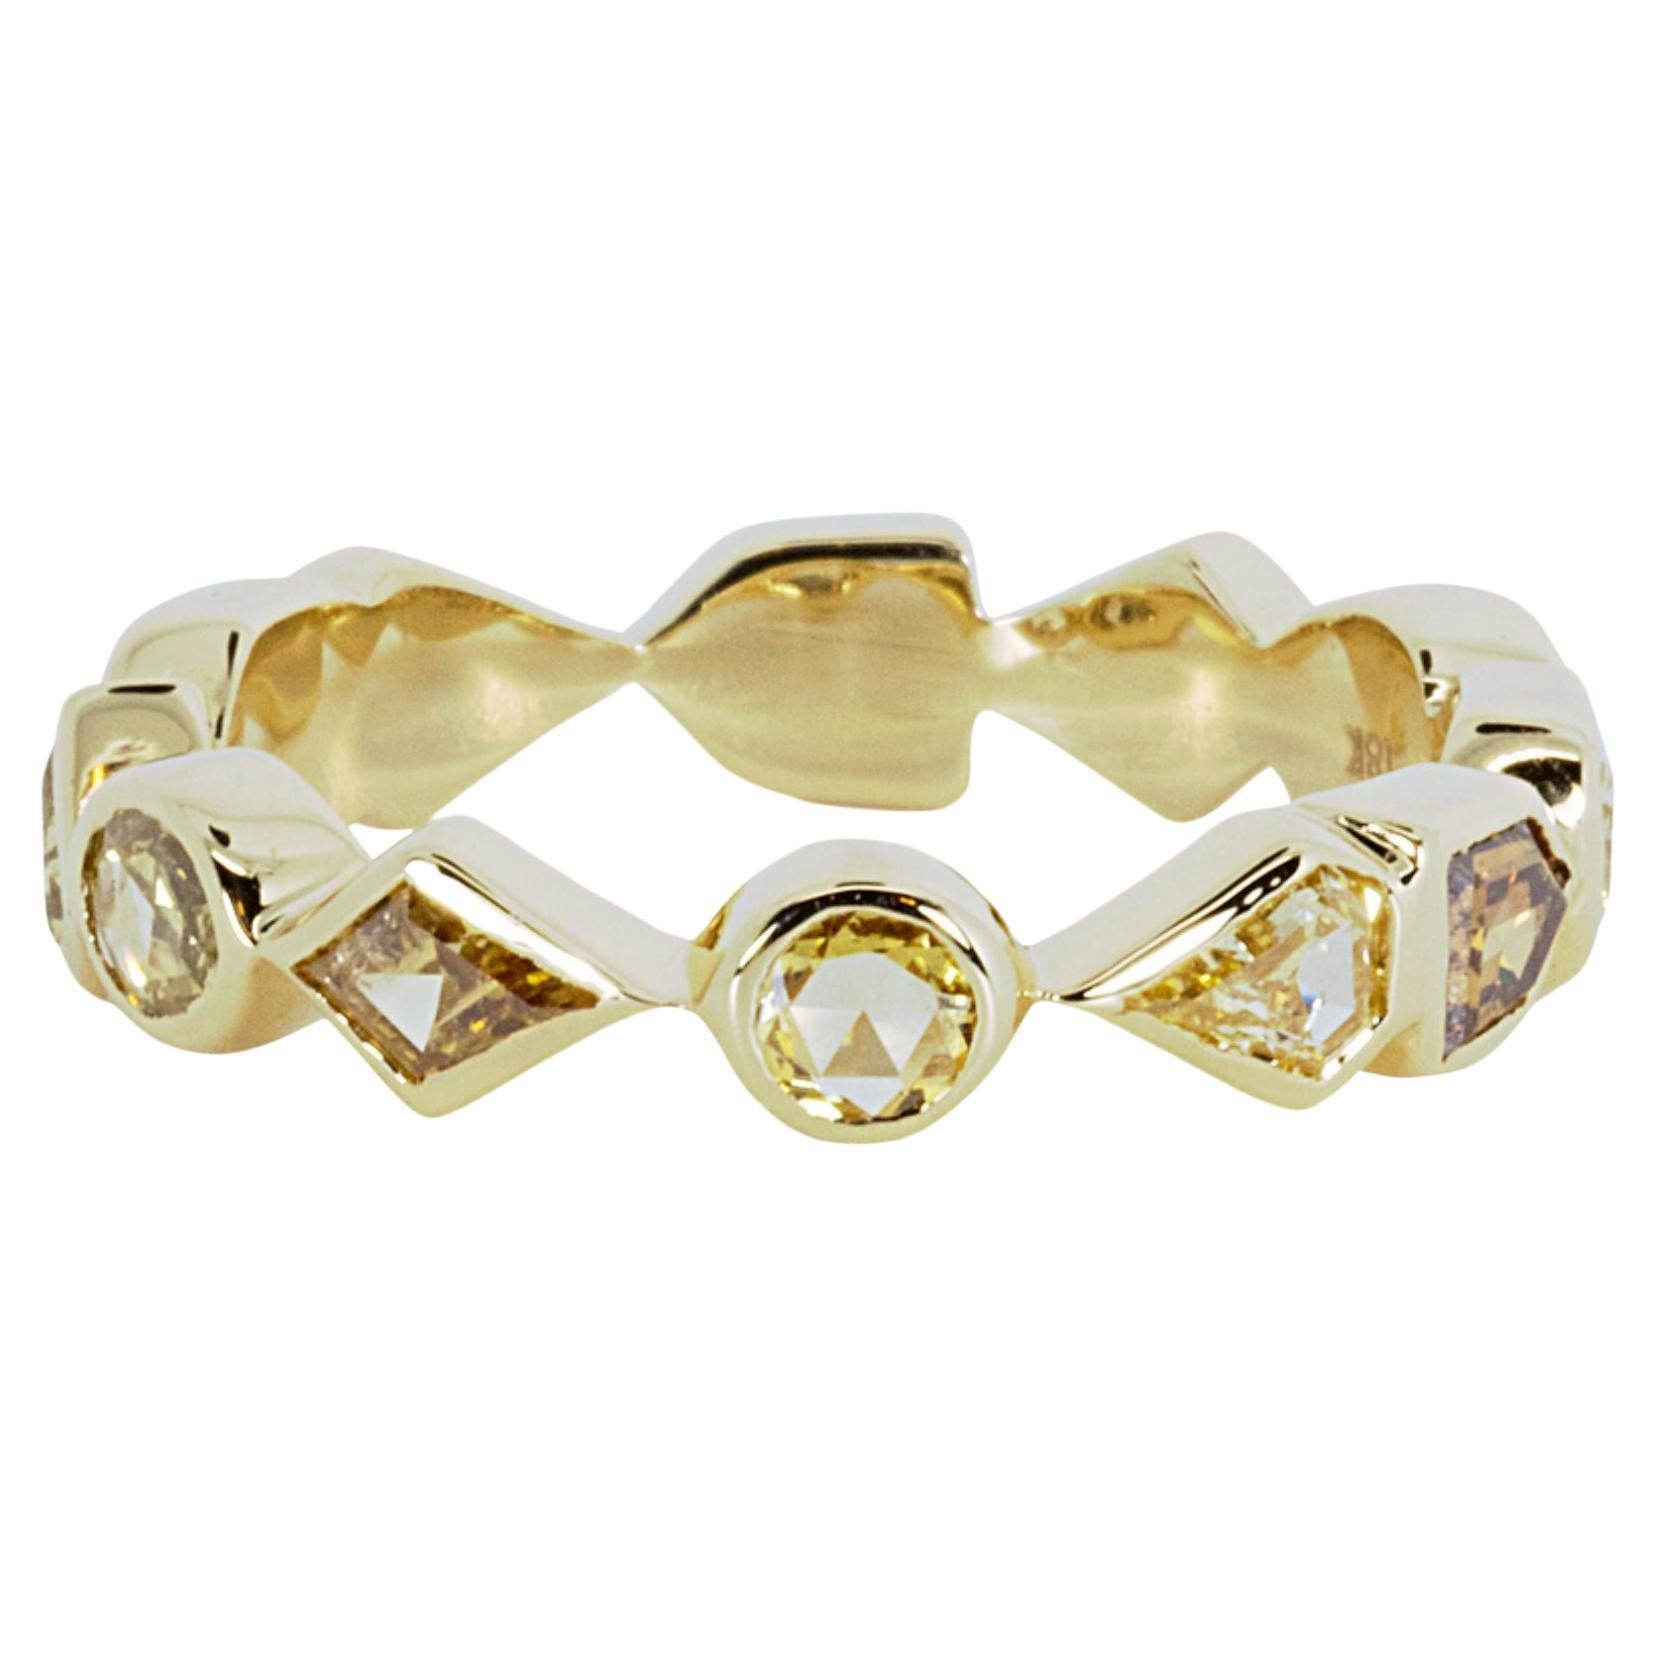 Exquisite 18k Yellow Gold Colored Diamond Ring For Sale